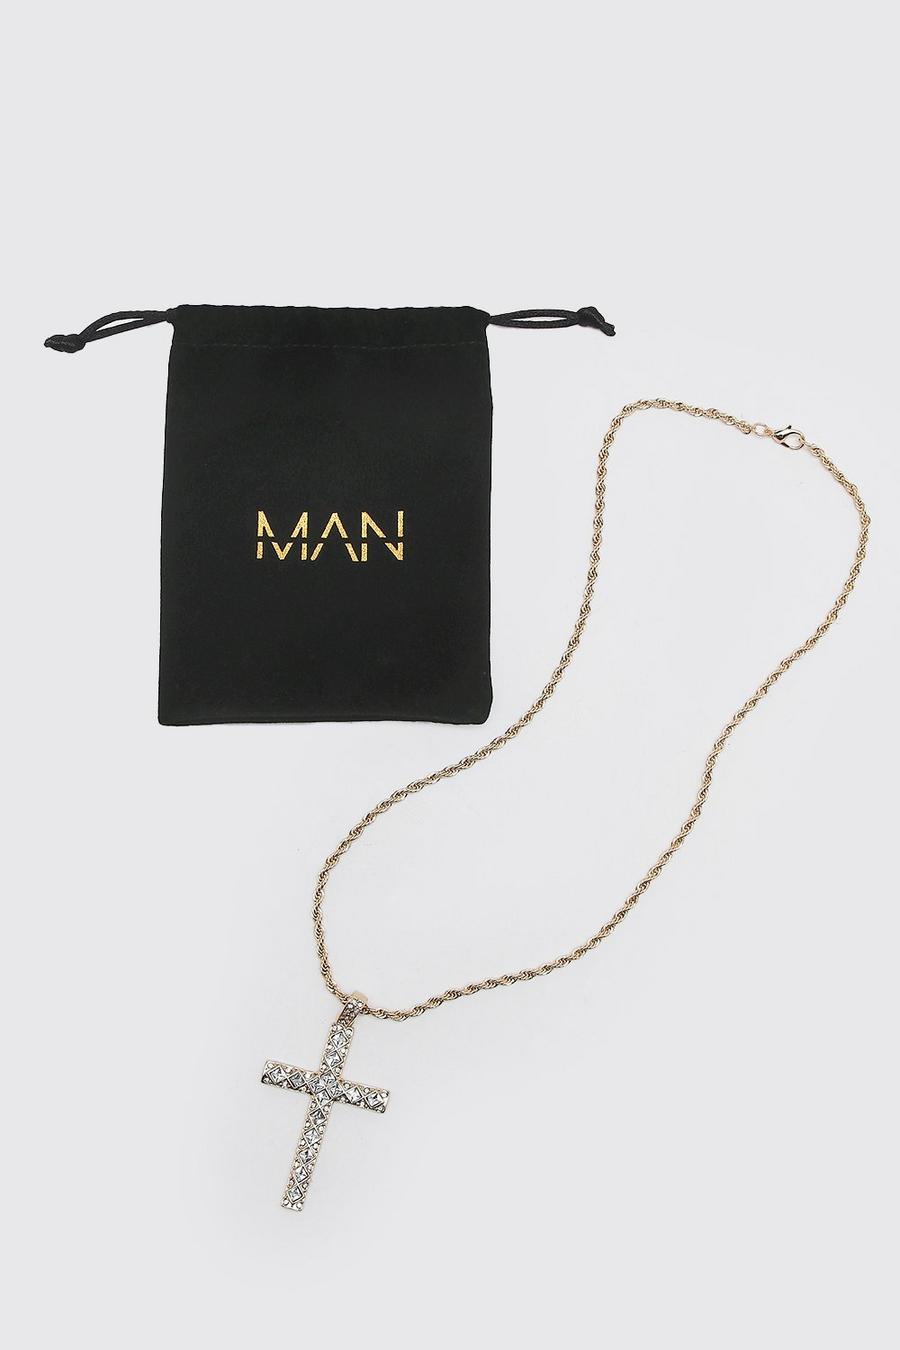 Gold metallic Iced Crystal Cross Necklace with Gift Bag